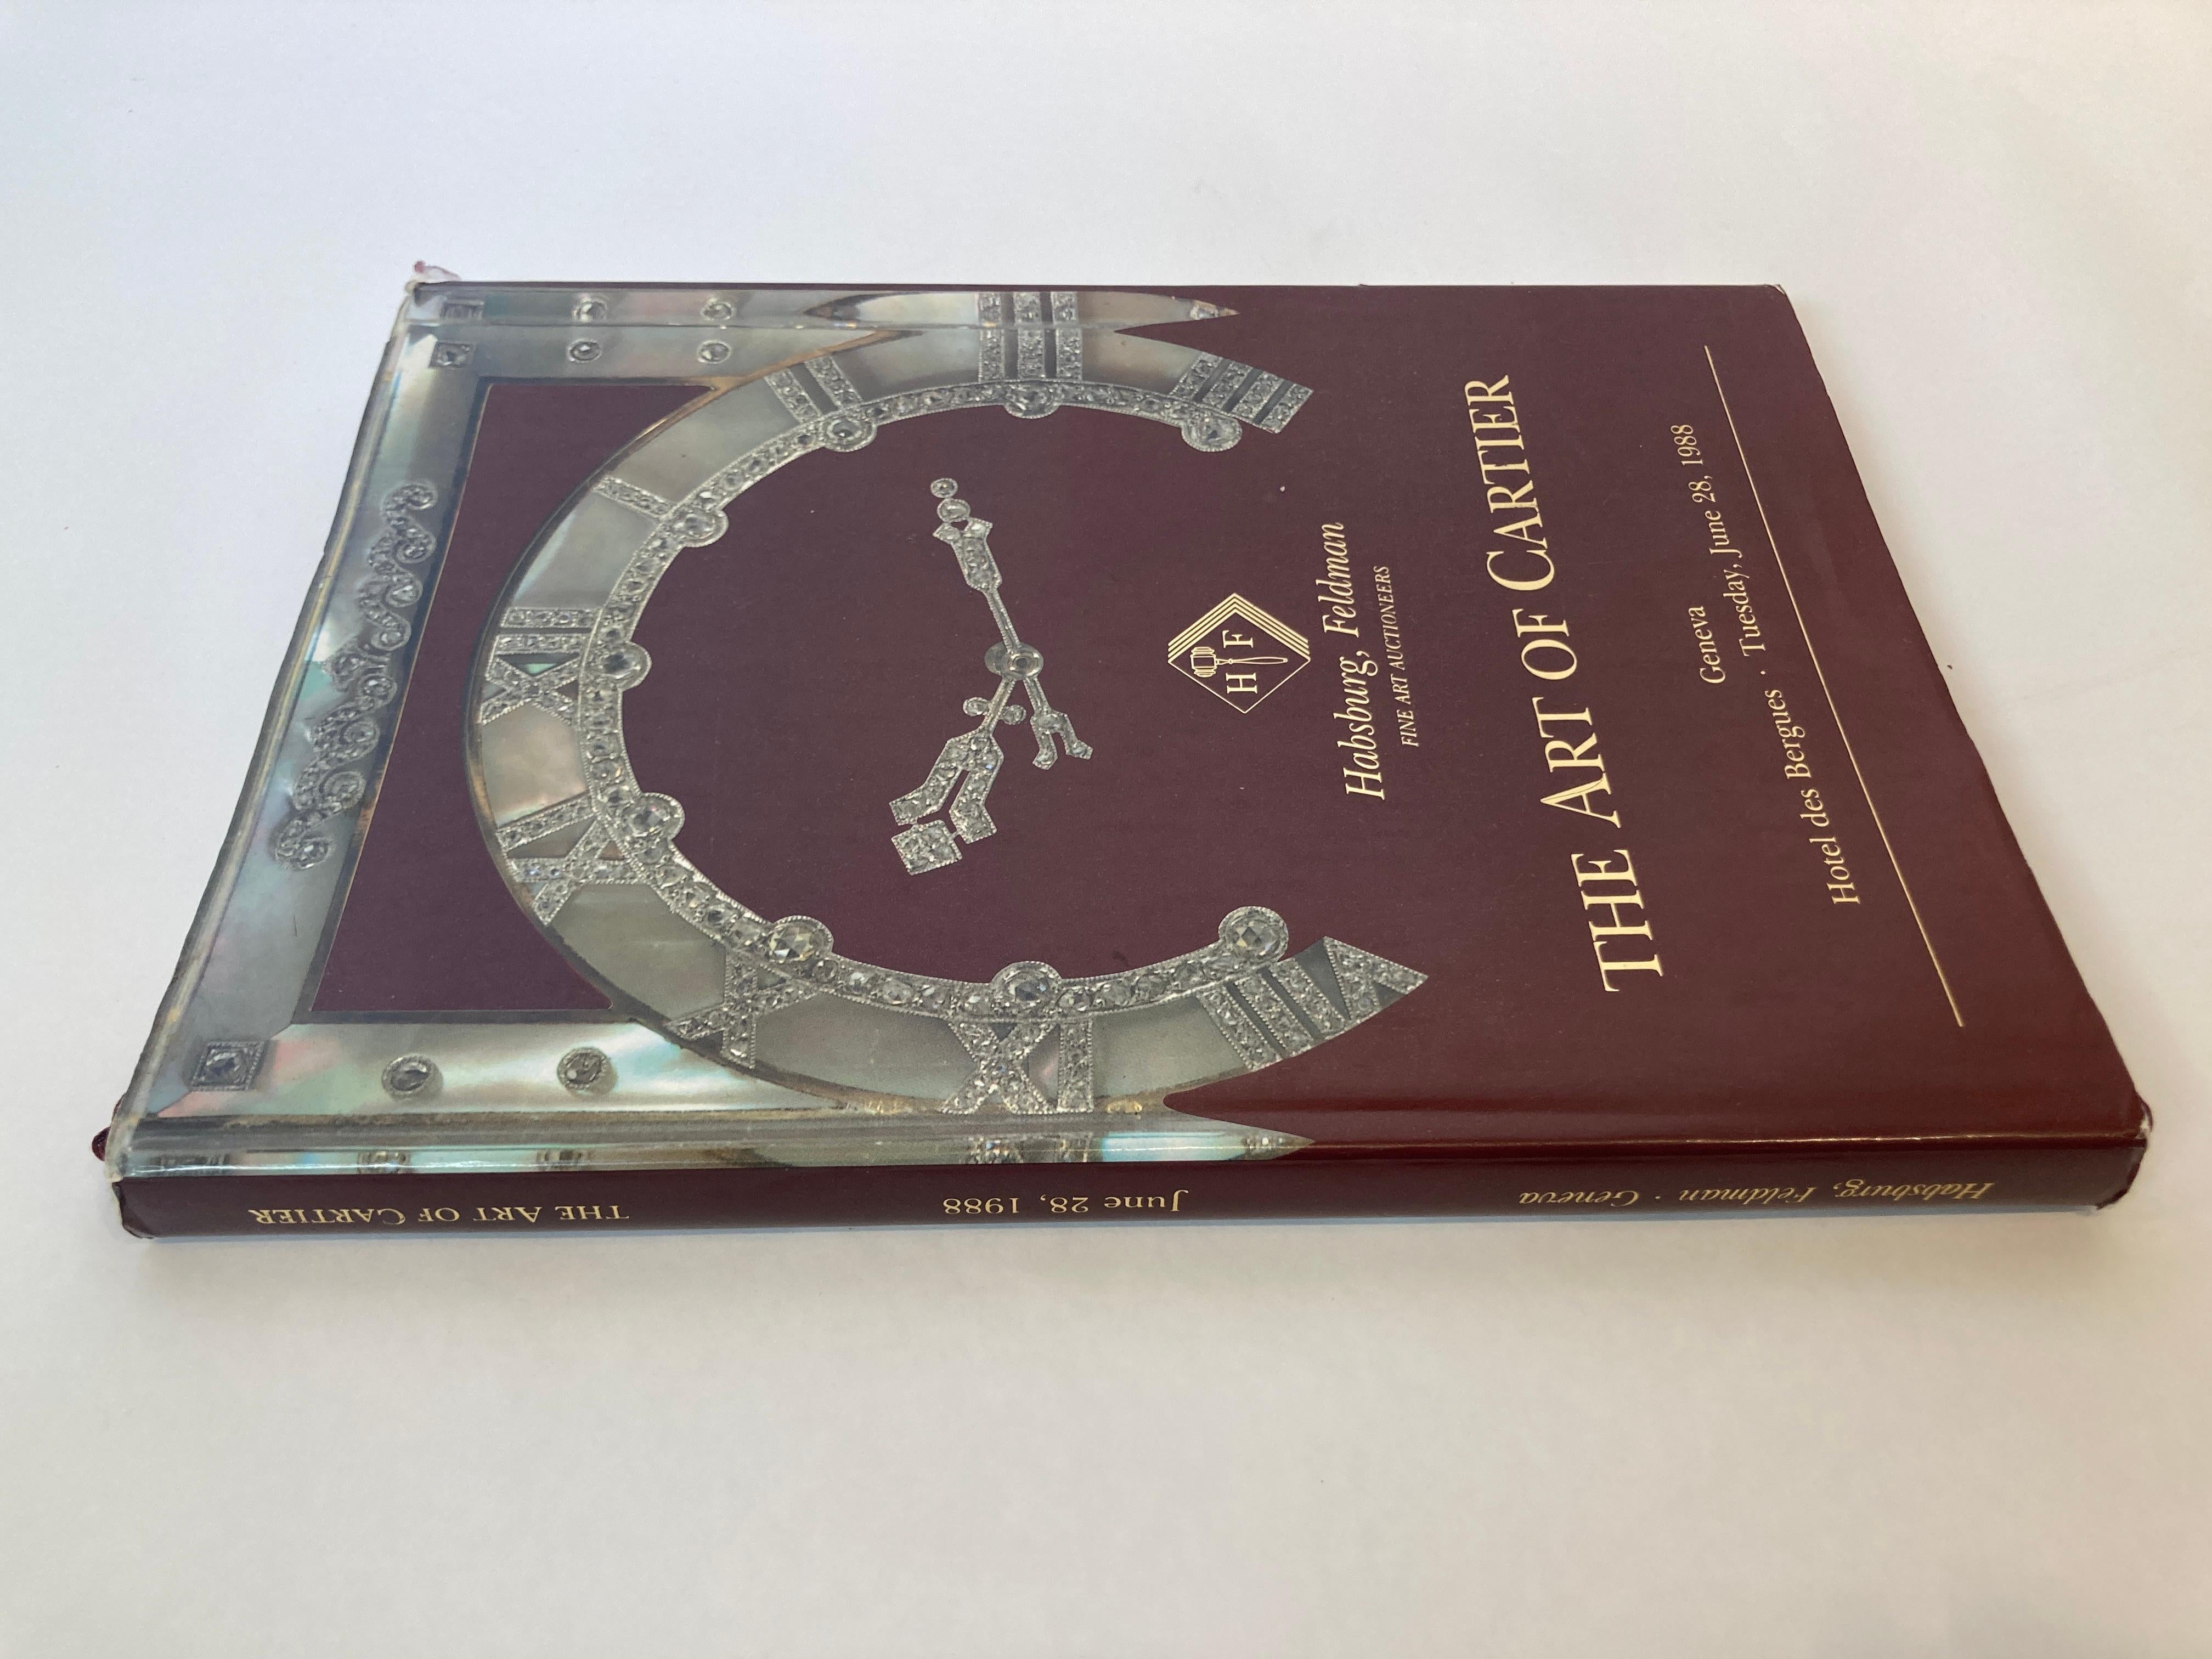 The Art of Cartier 1988 Geneva Auction Hardcover Book Catalog.
The Art of Cartier Habsburg Feldman auction hardcover.
 135 page catalog June 28, 1988, 216 fabulous lots.
Hardcover with dustcover.
Dimensions: 11 in x 8 in.
From the legendary French